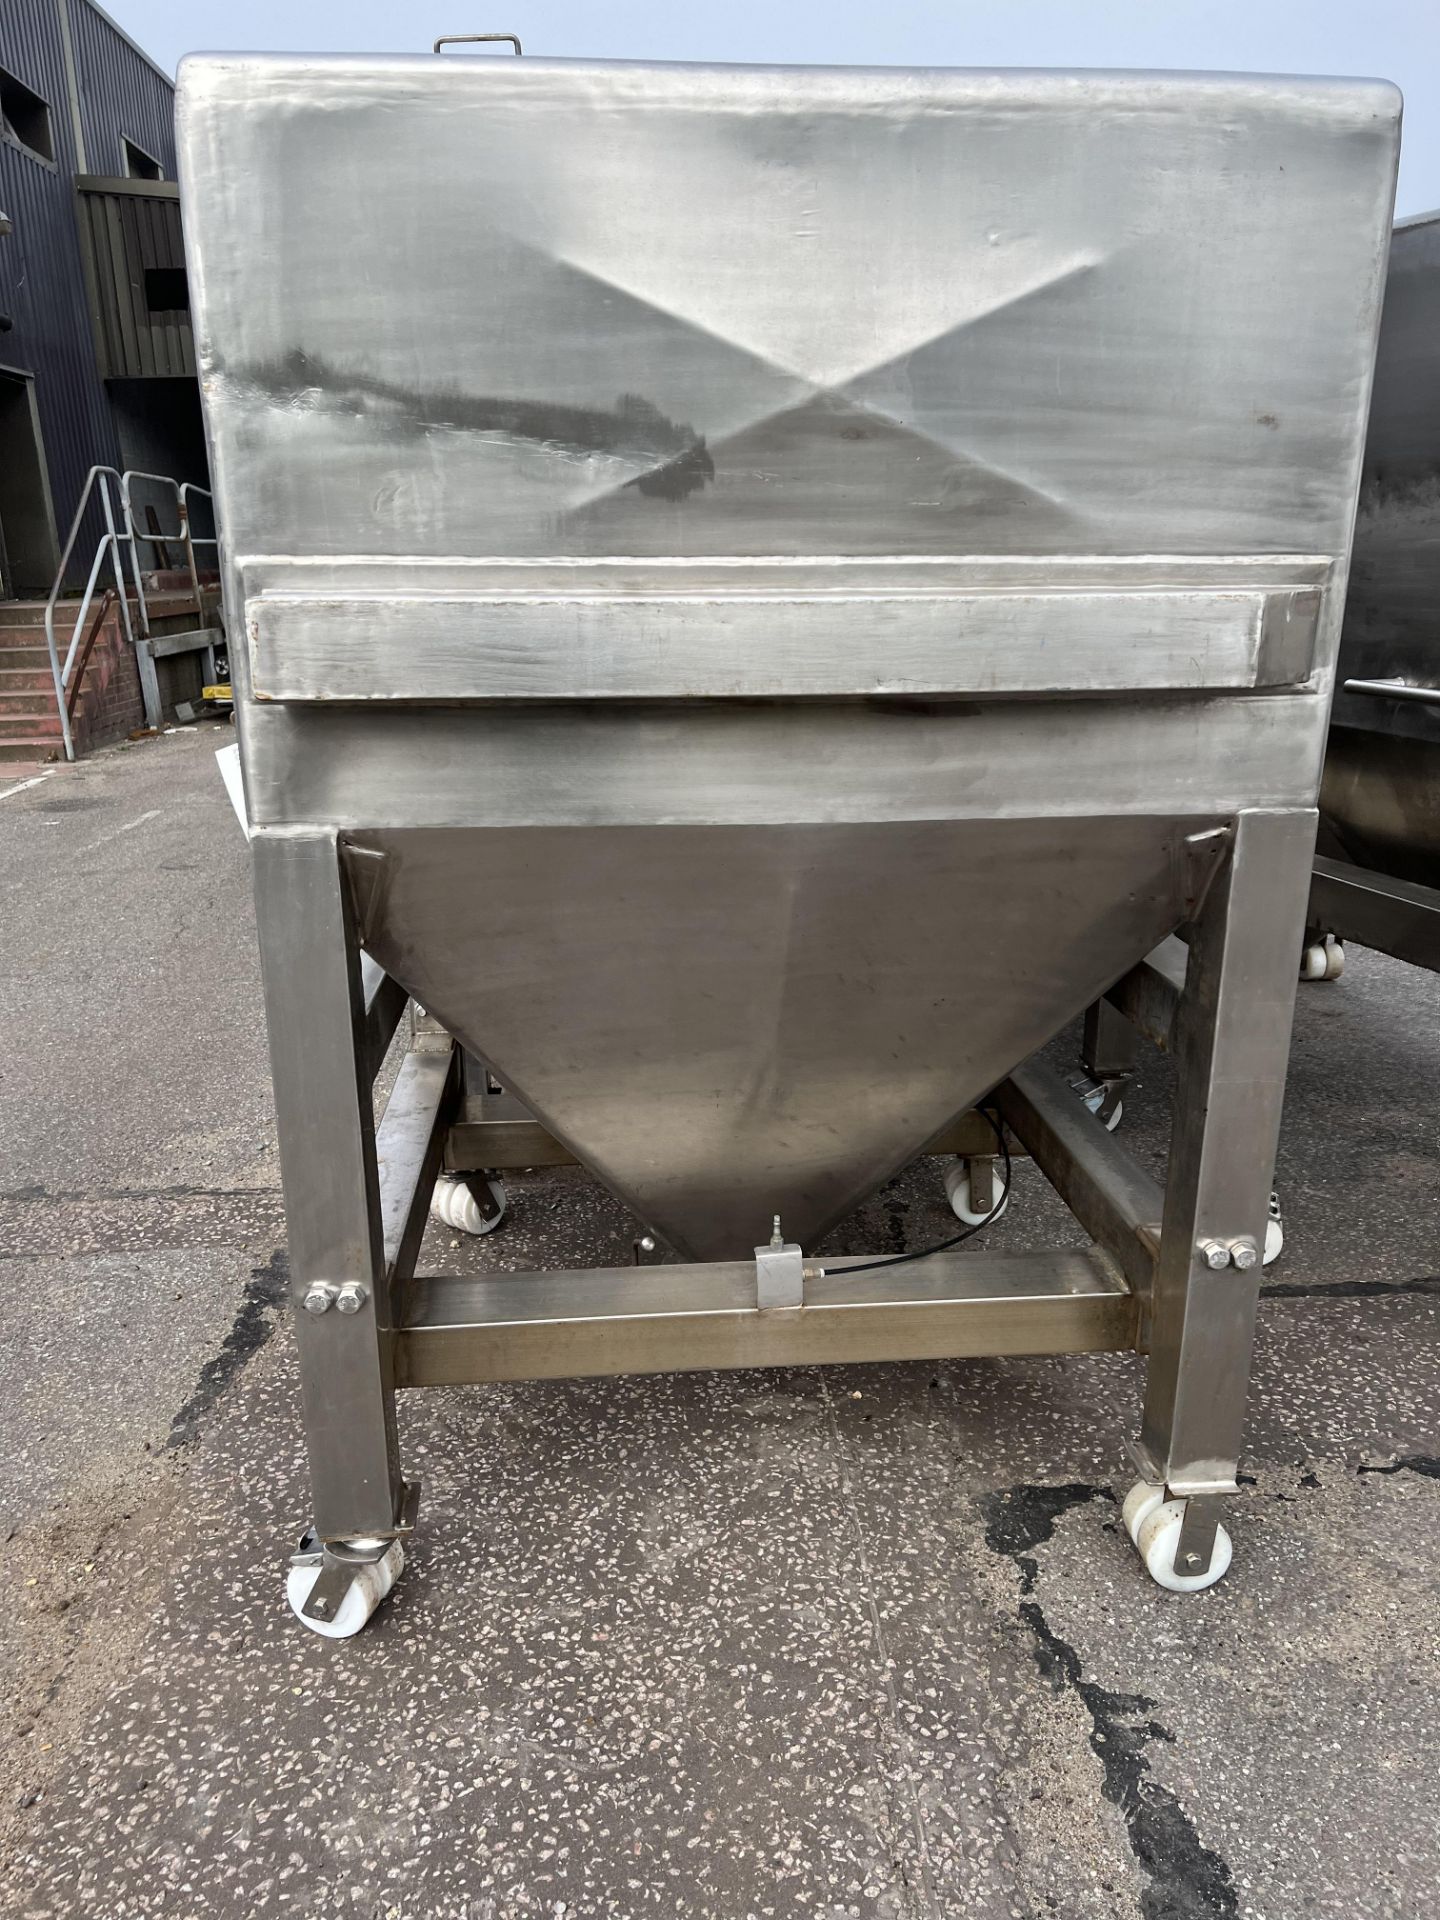 JPE IBC2 KL Fluted Stainless Steel Mobile Tank Lidded, with bottom outlet, approx. 1.5 x 1.4 x 2. - Image 2 of 6